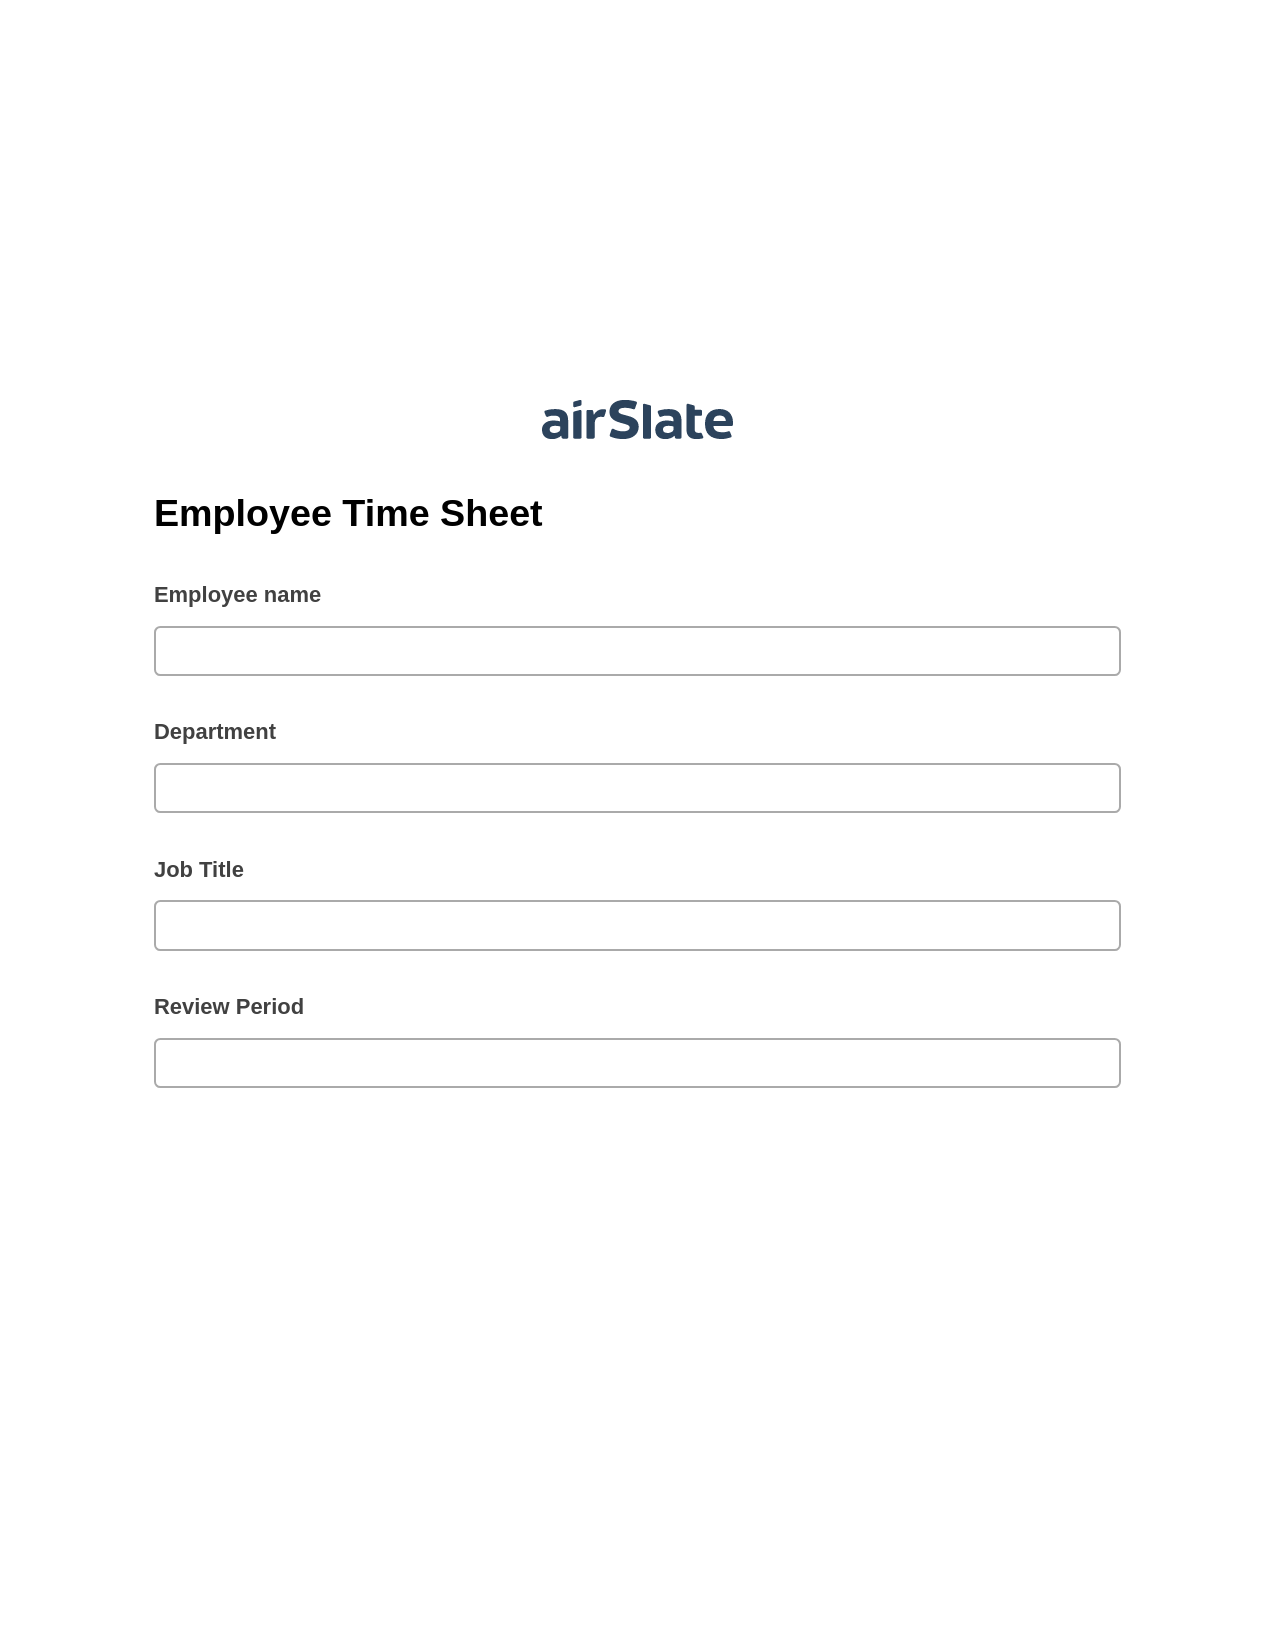 Employee Time Sheet Pre-fill from Office 365 Excel Bot, Hide Signatures Bot, Export to Smartsheet